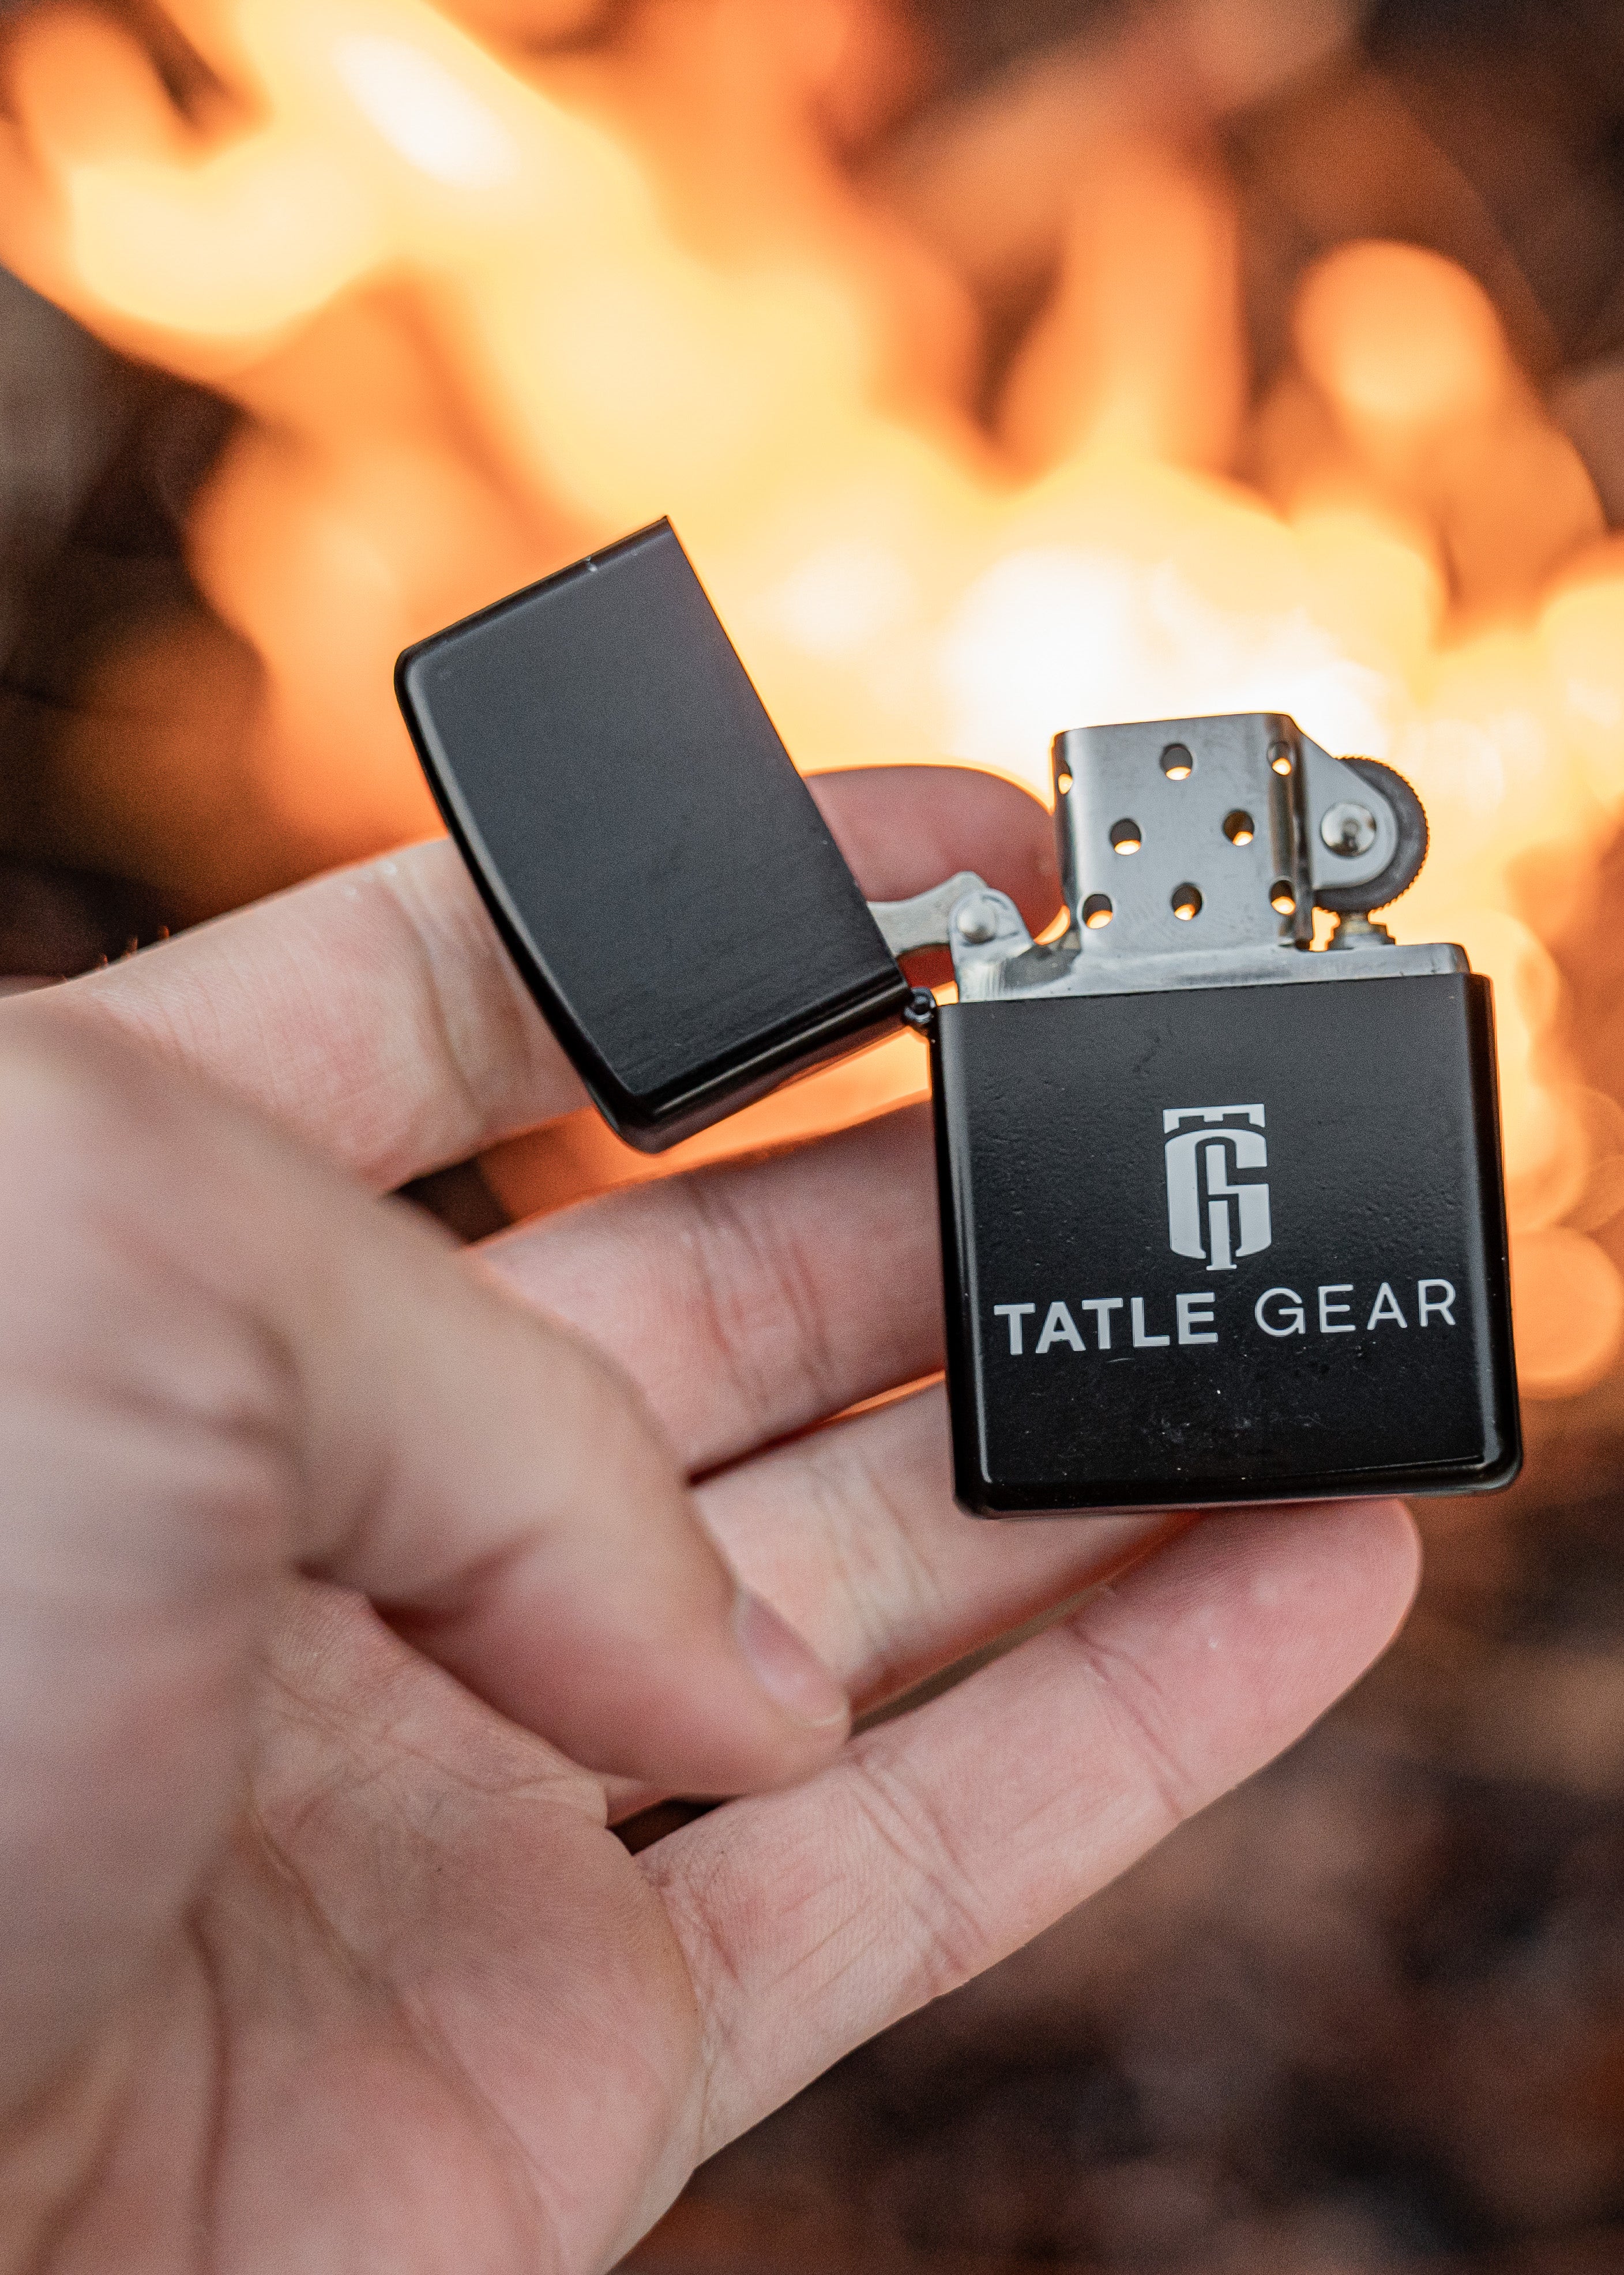 The Tatle Gear Lighter Awesome Photo